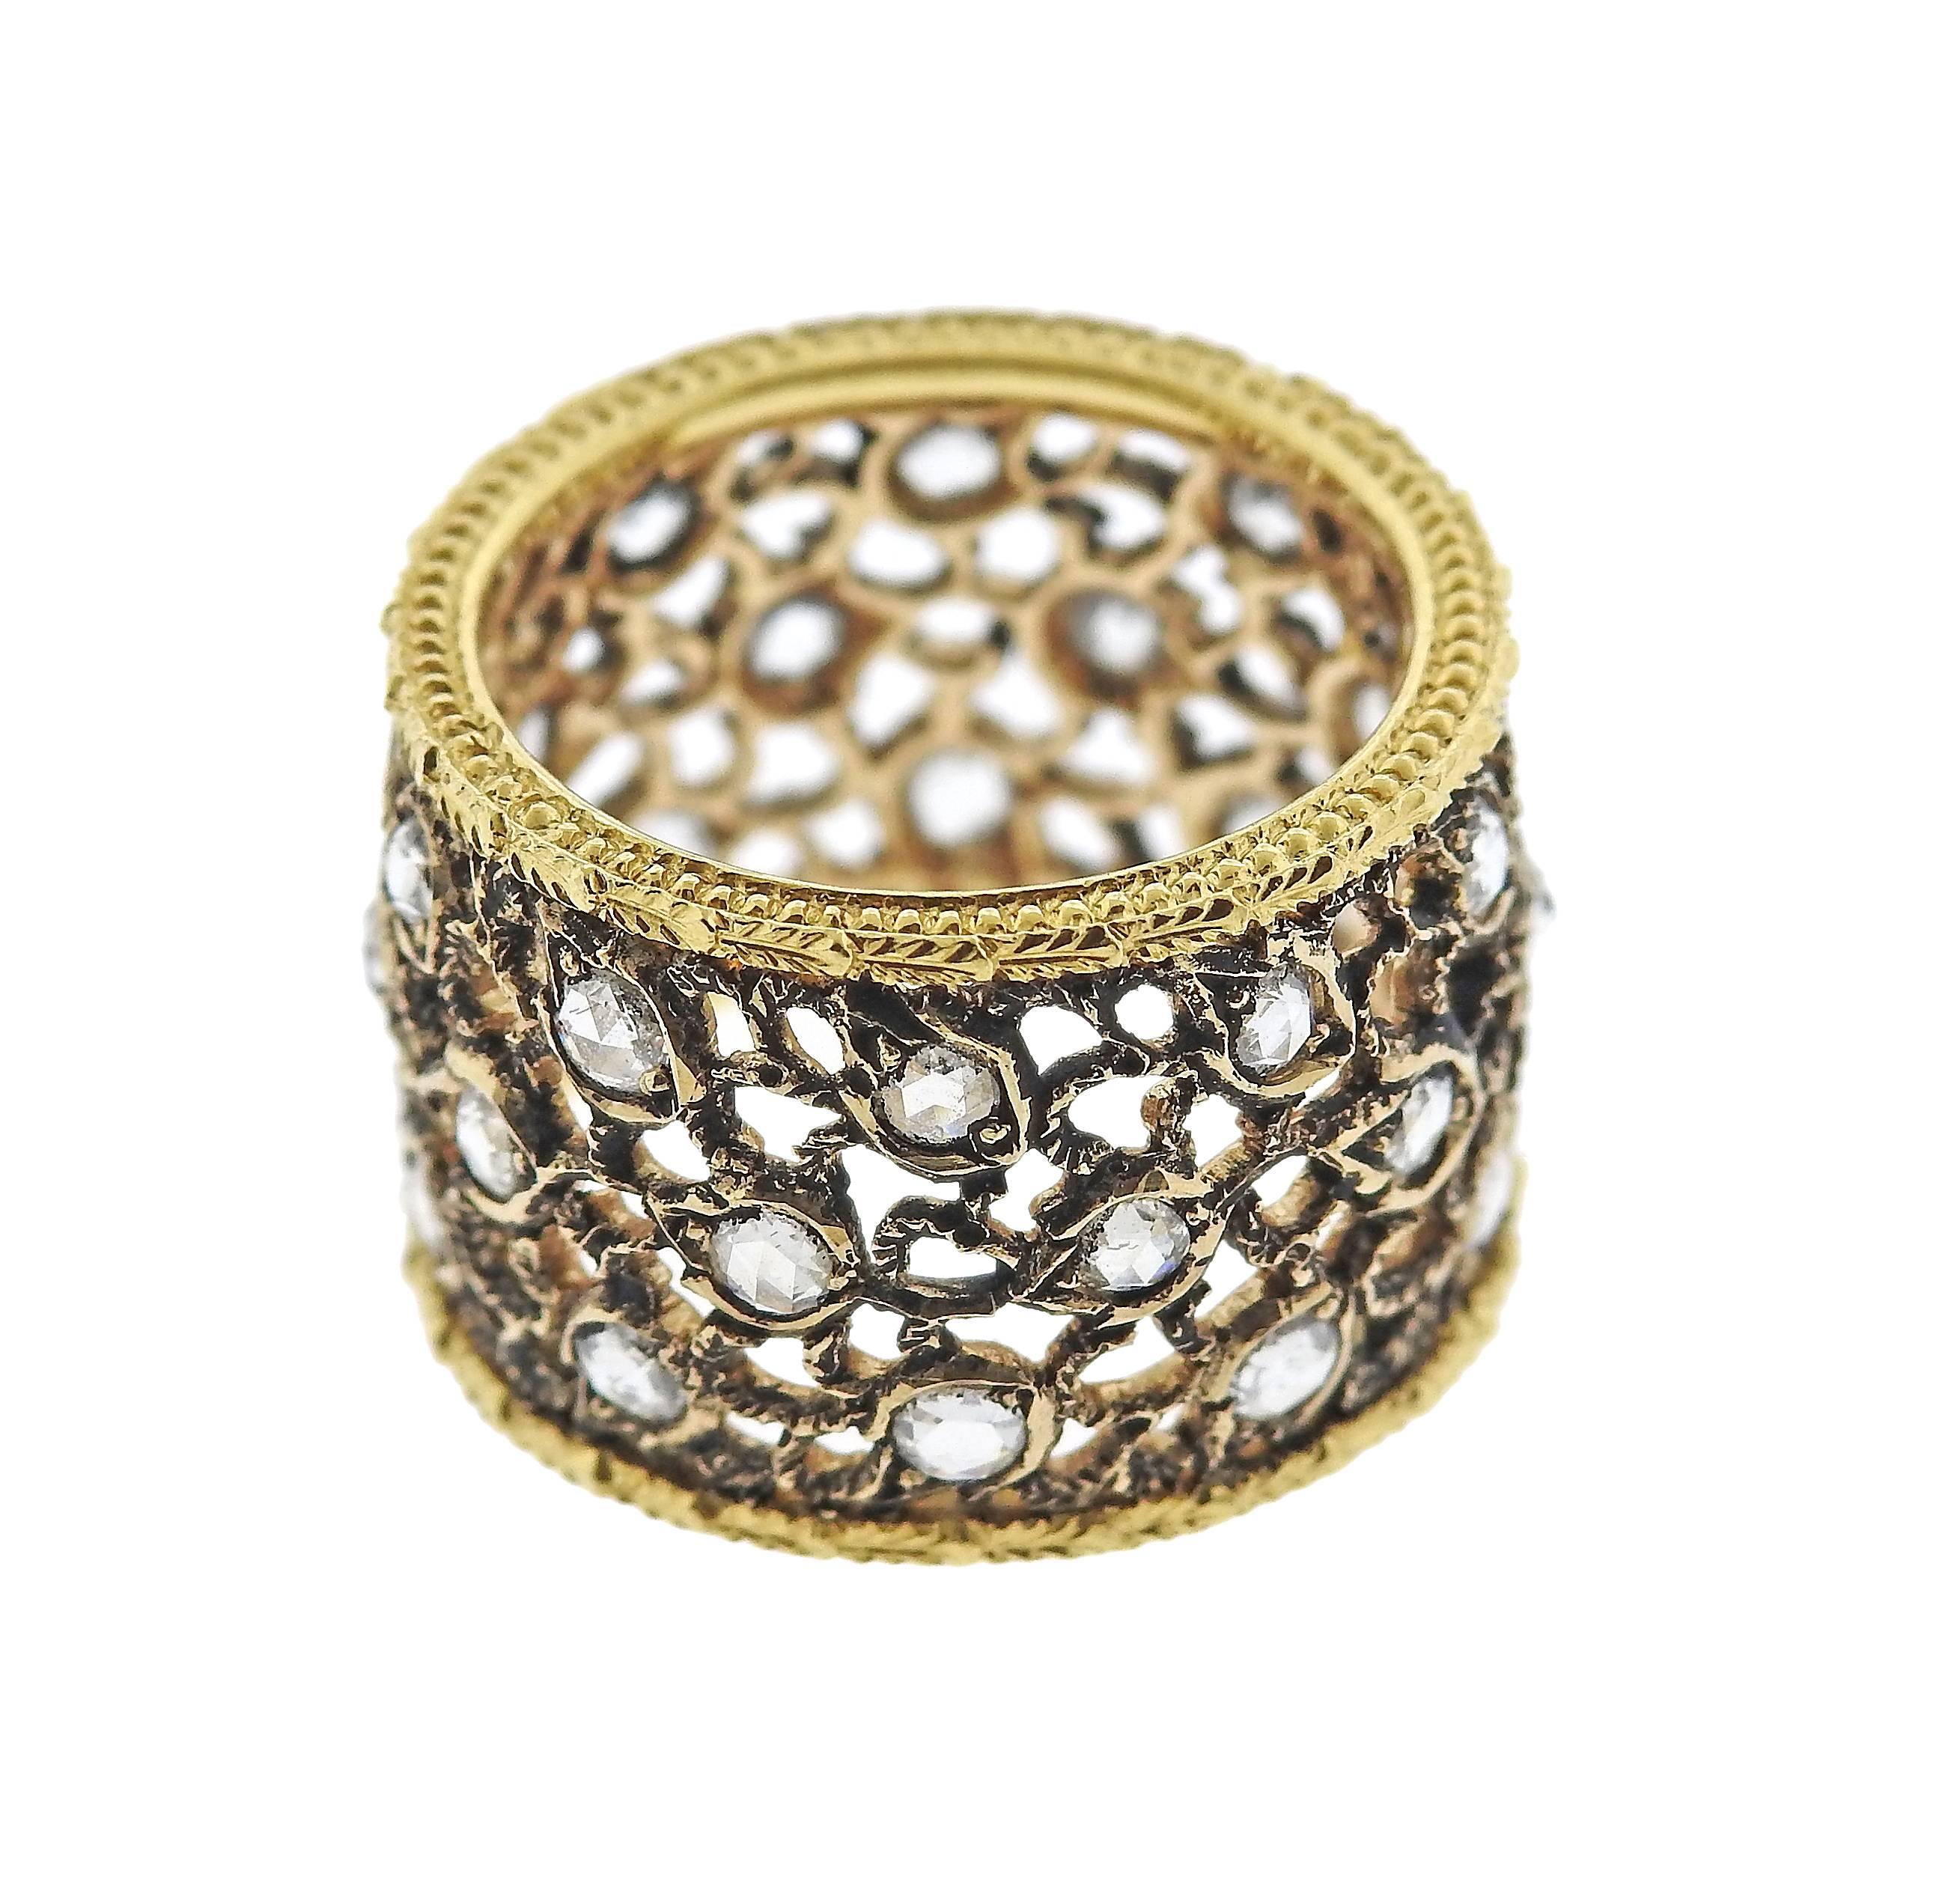 18k yellow gold and burnished white gold openwork wide band ring, crafted by Buccellati, decorated with rose cut diamonds. Ring size 5 , ring is 13.3mm wide, weighs 7.1 grams. Marked: 750, 18k, Italy, Buccellati R5244. 